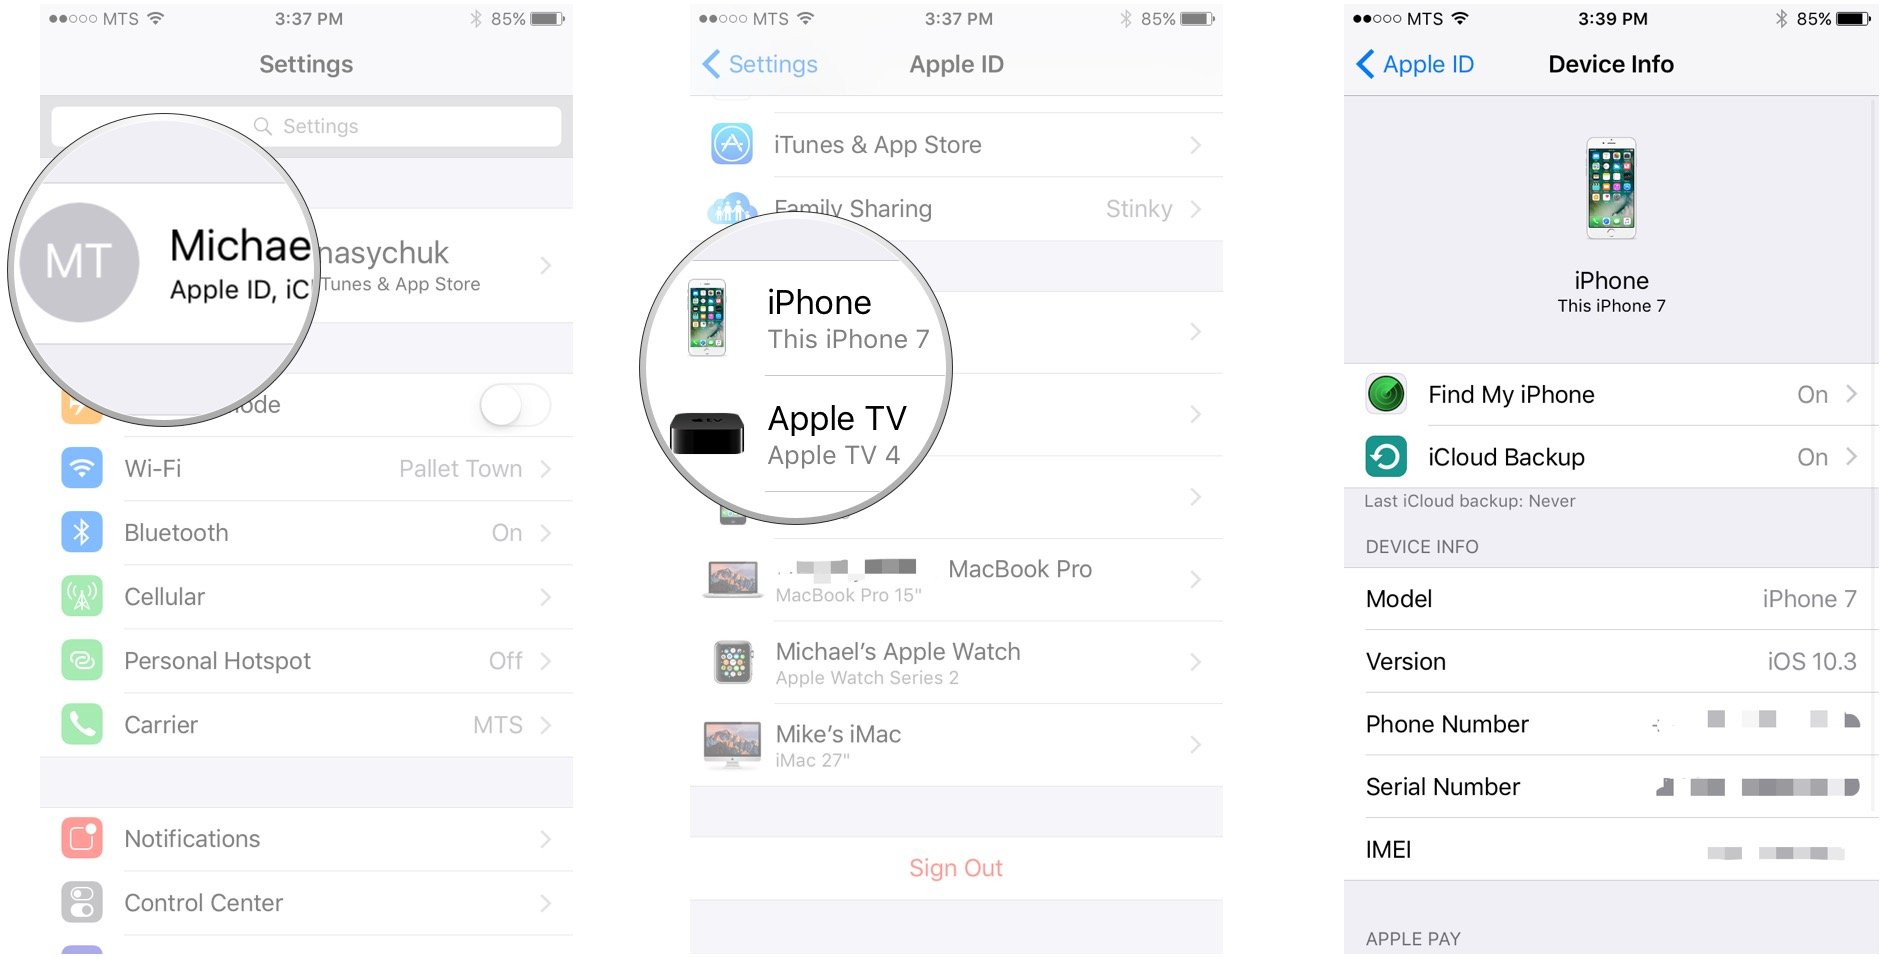 How to view any iPhone, iPad, Mac, or Apple Watch